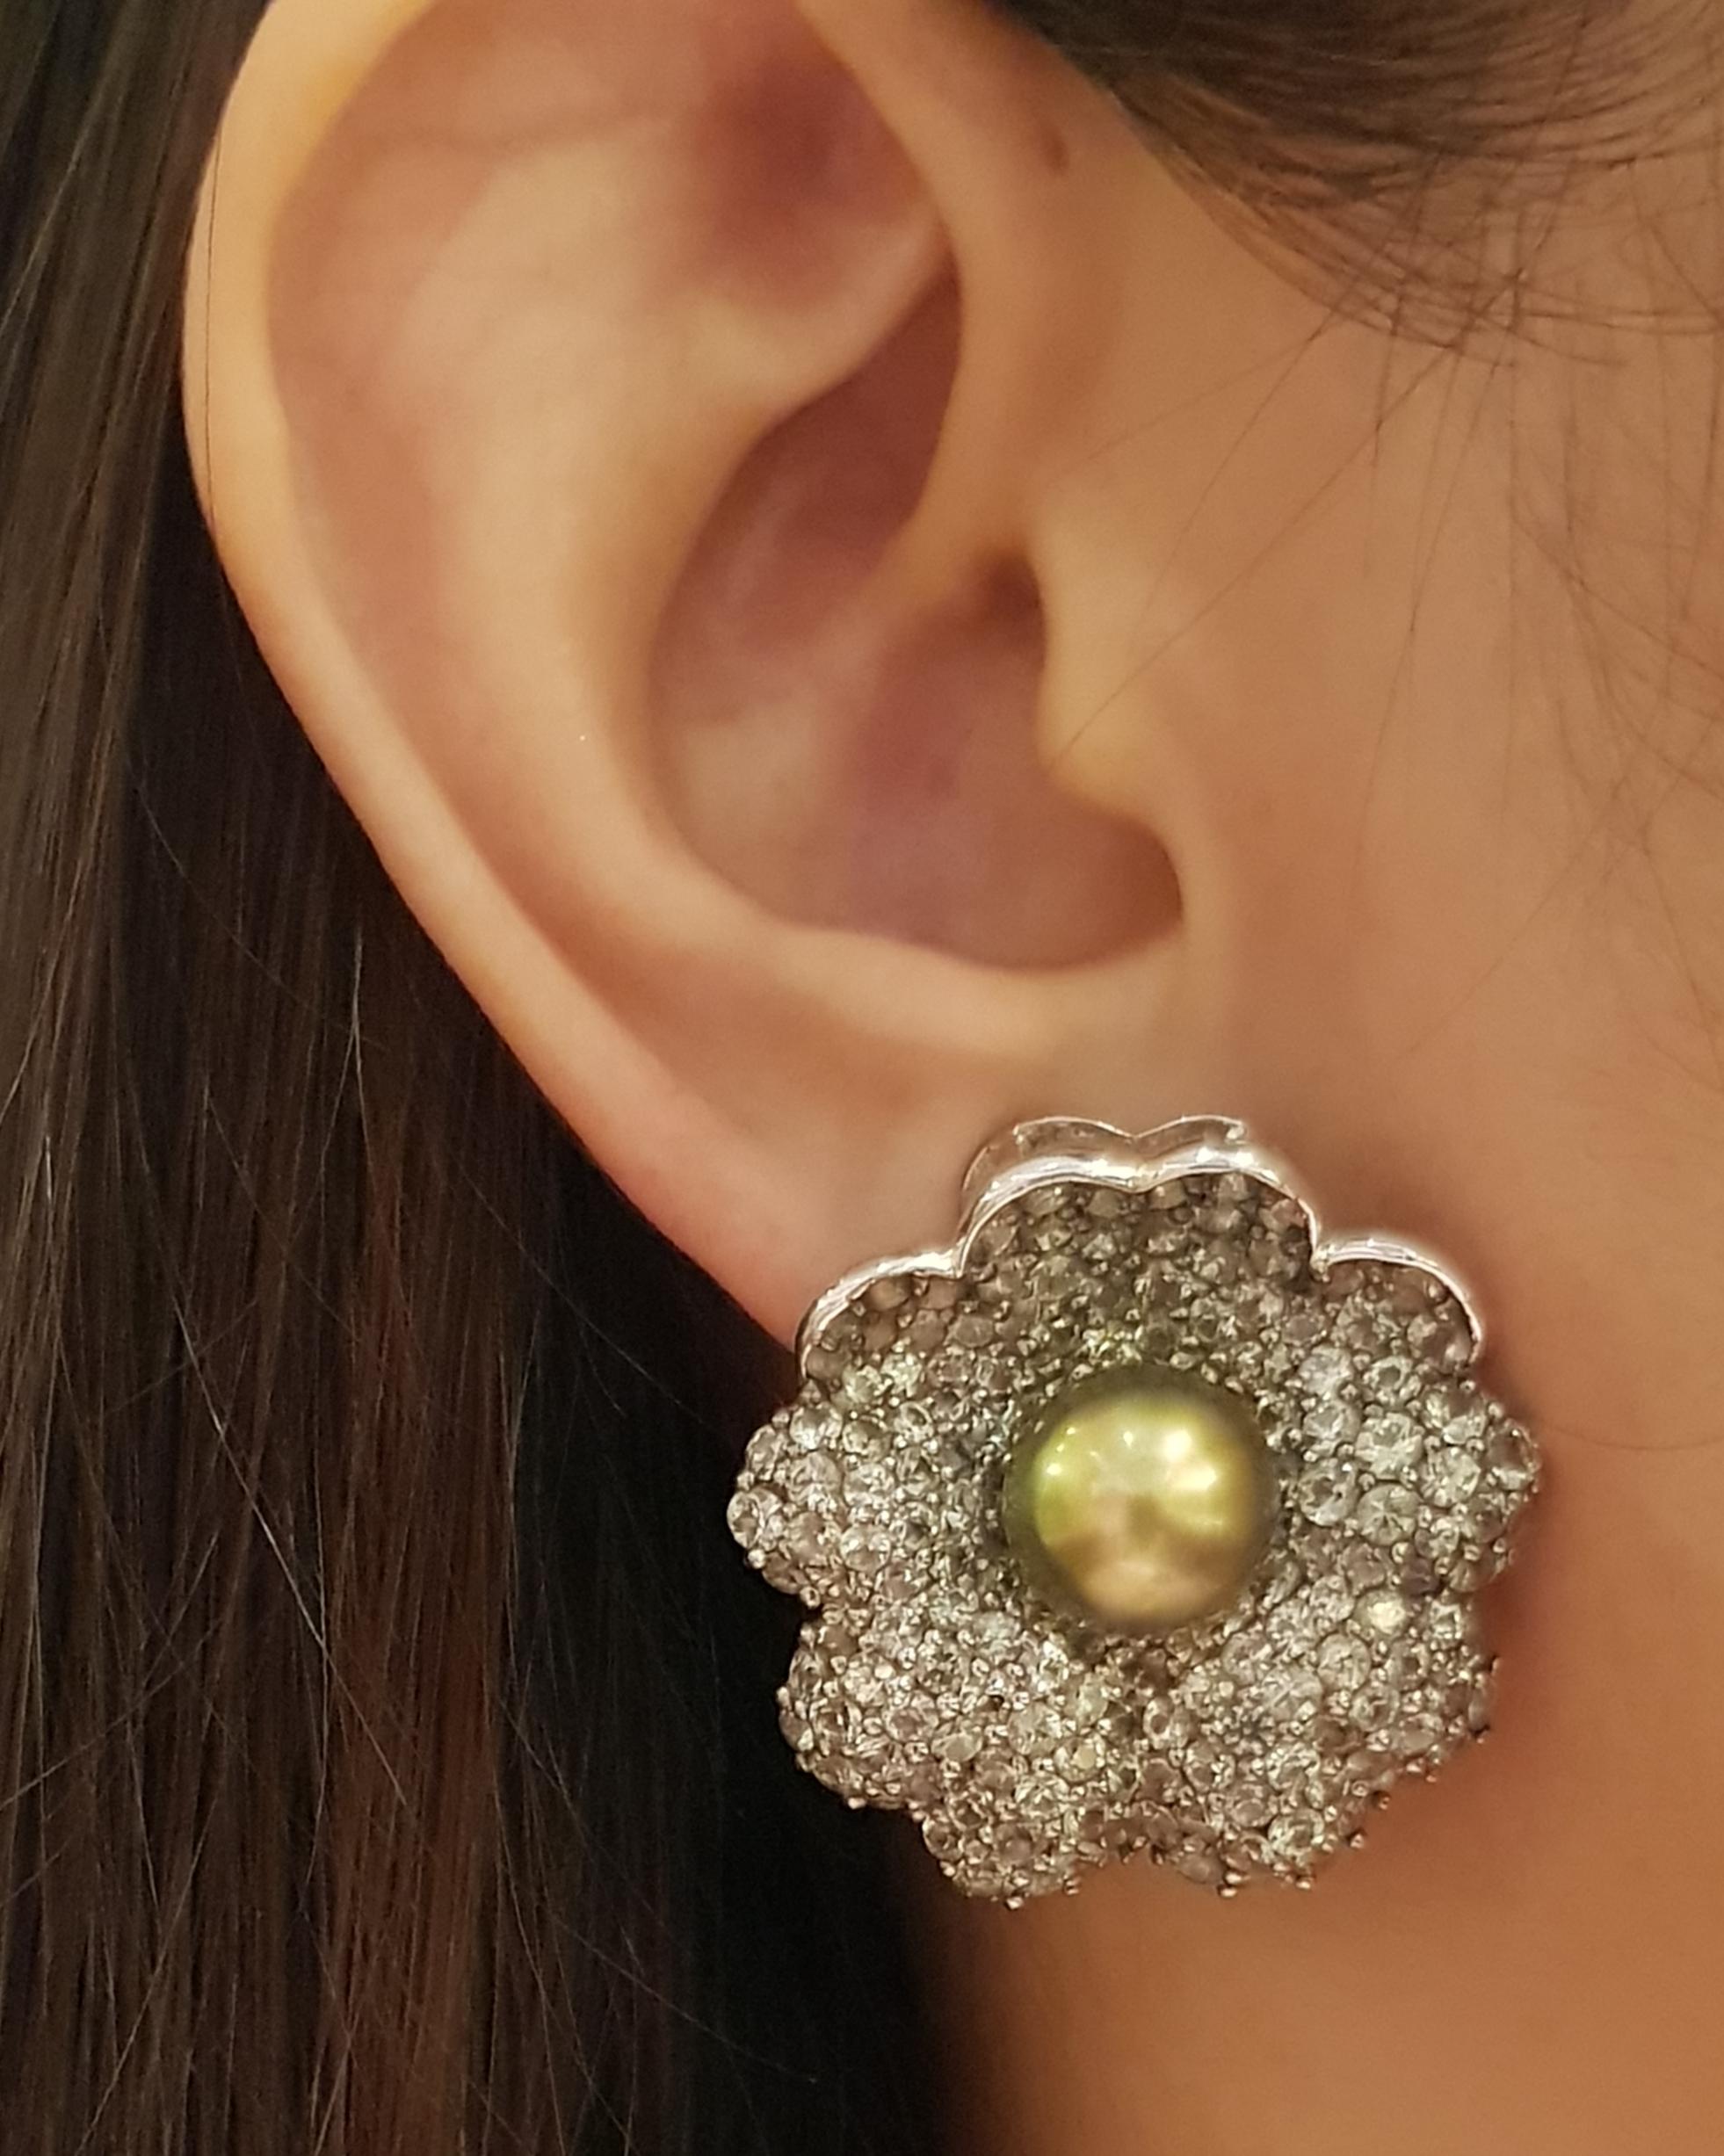 South Sea Pearl with Green Sapphire 1.99 carats Earrings set in 18 Karat White Gold Settings

Width:   3.0 cm 
Length:  3.5 cm
Total Weight: 38.49 grams

